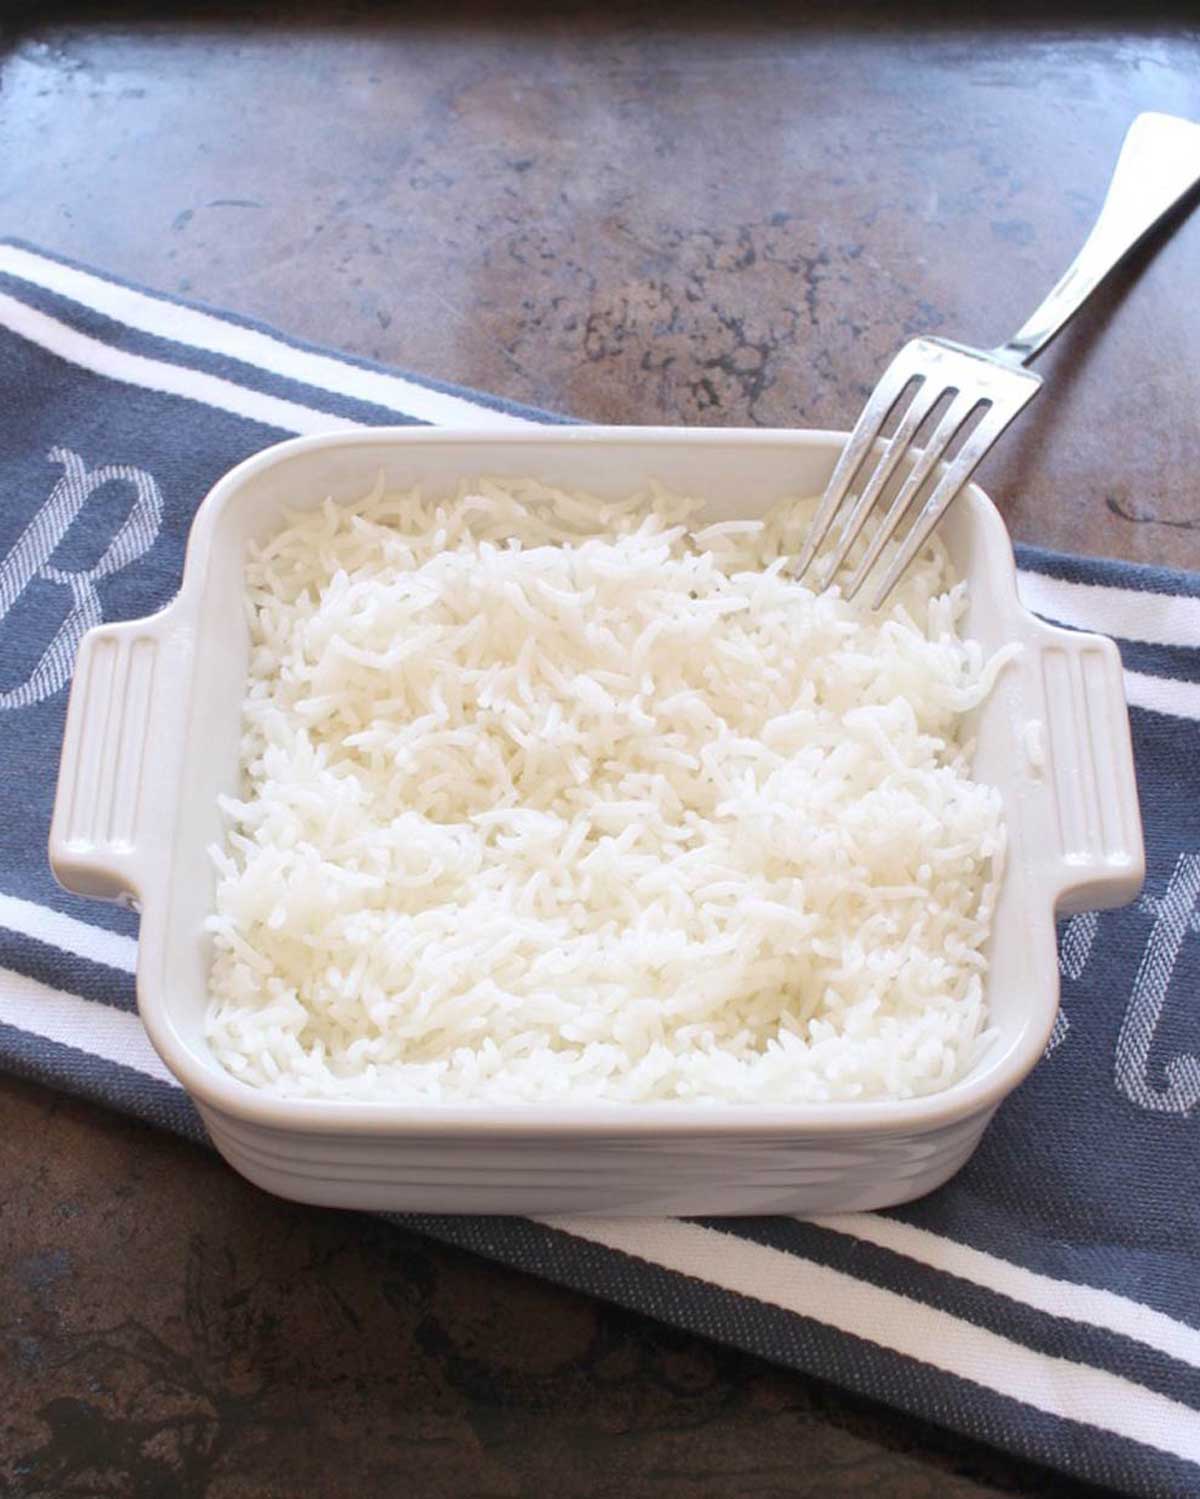 a bowl of baked rice on a blue and white napkin.